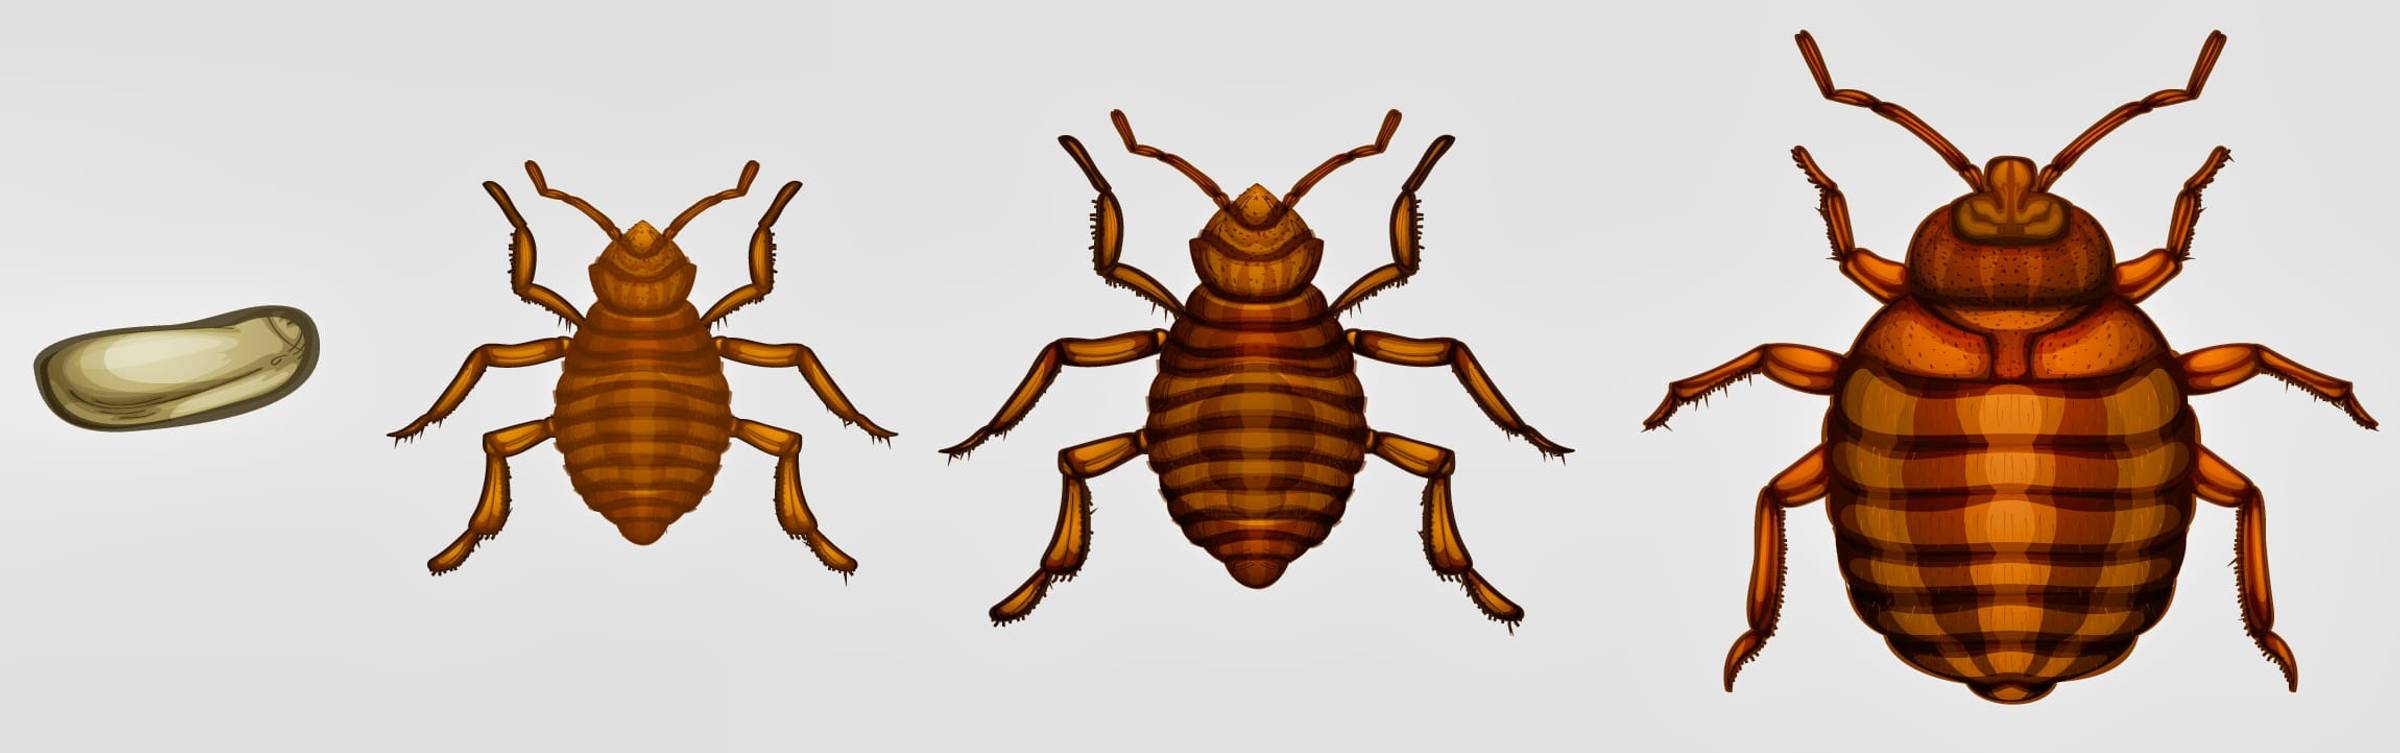 Bed Bug Life Cycle Illustrations